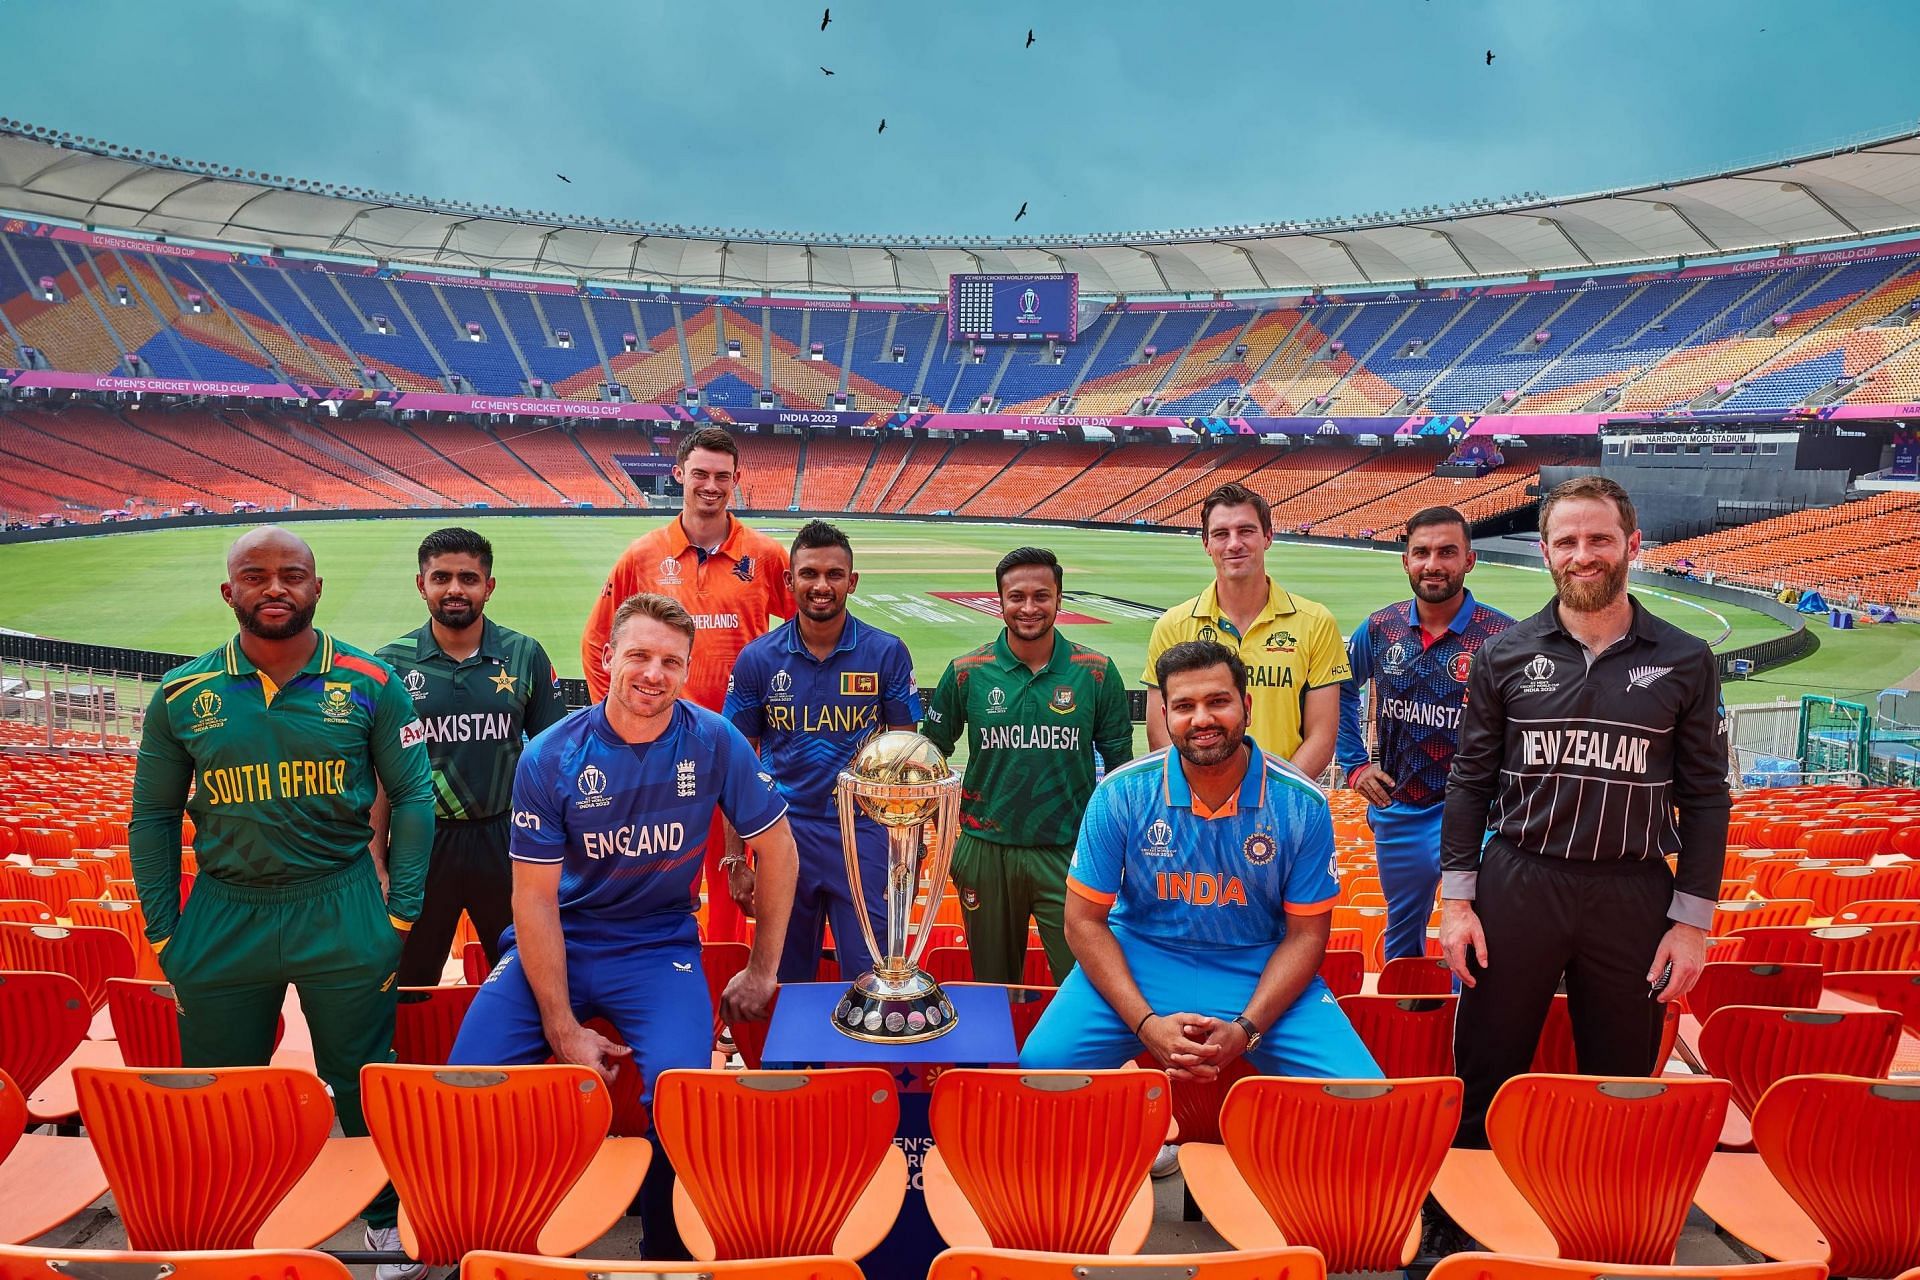 2023 ODI World Cup captains pose for a picture [ICC]